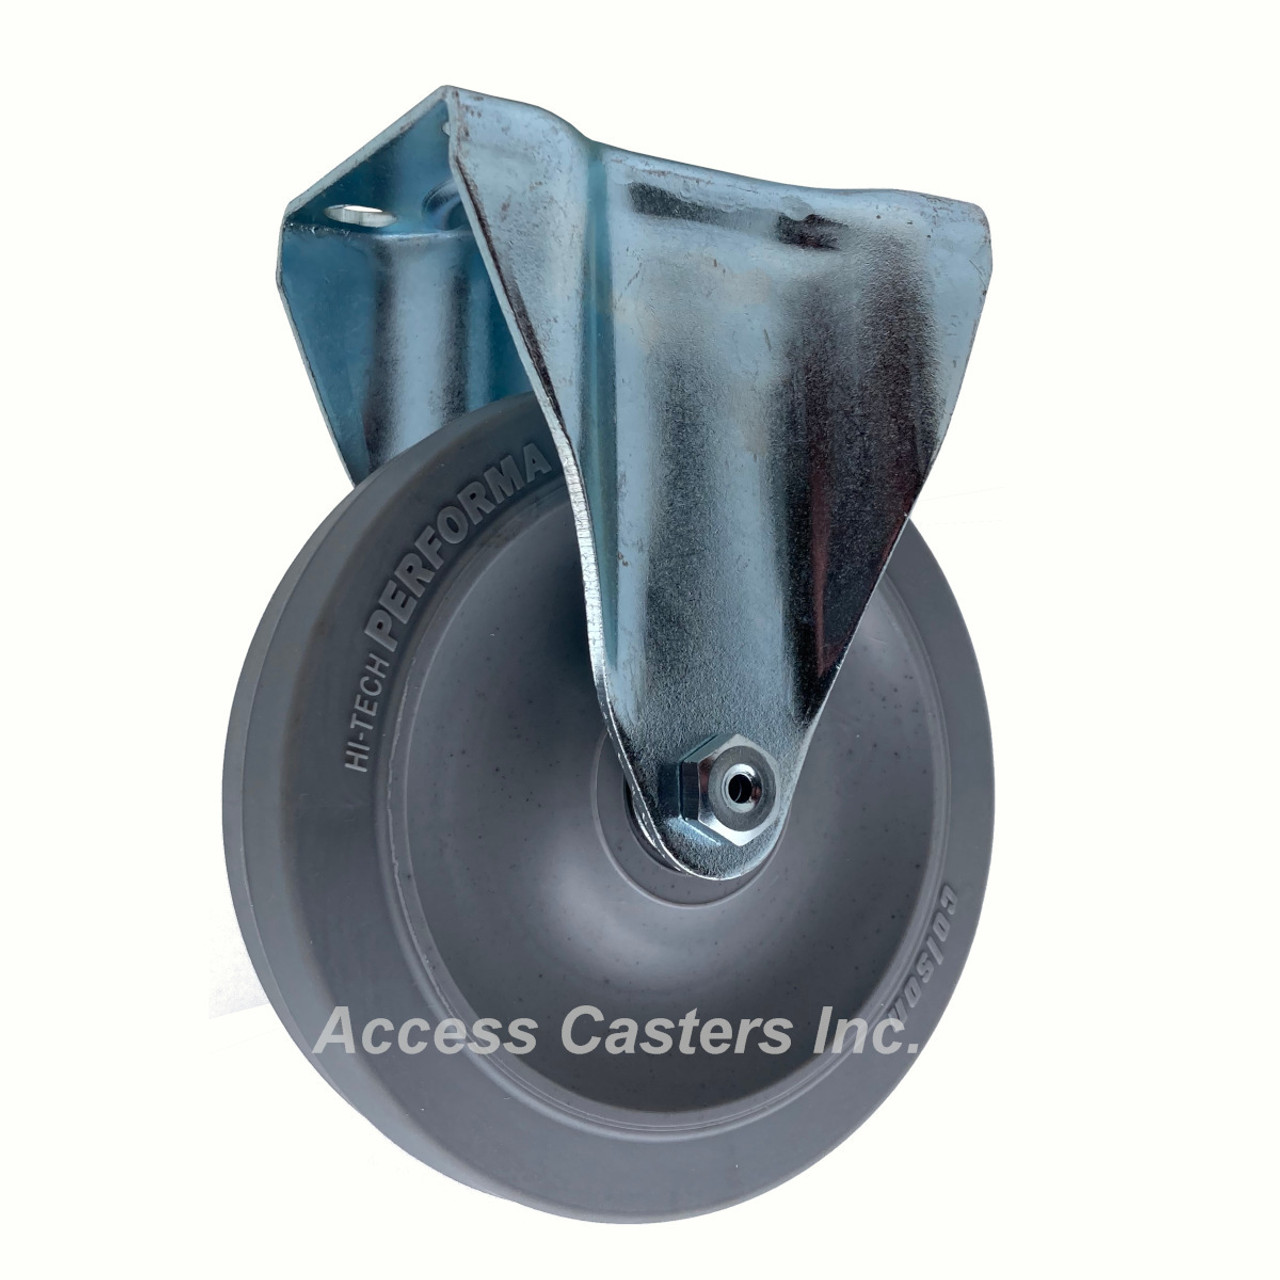 5P20PFR 5" rigid caster with Colson Performa rubber wheel